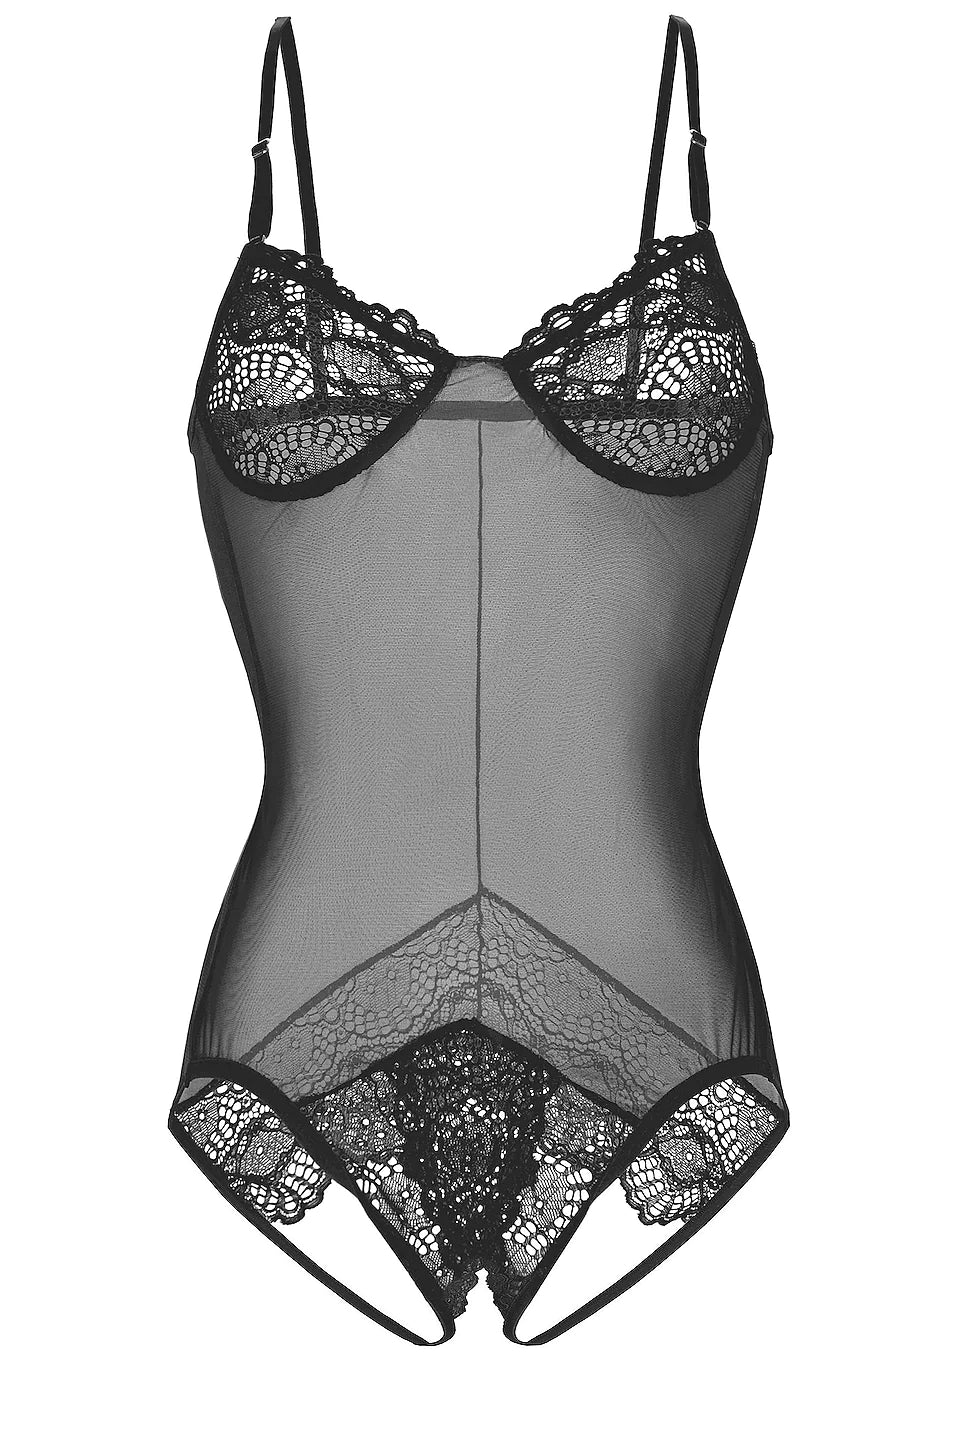  Whisper Sweet Nothings Coucou Bodysuit in Black Lingerie by Only Hearts- The Nookie